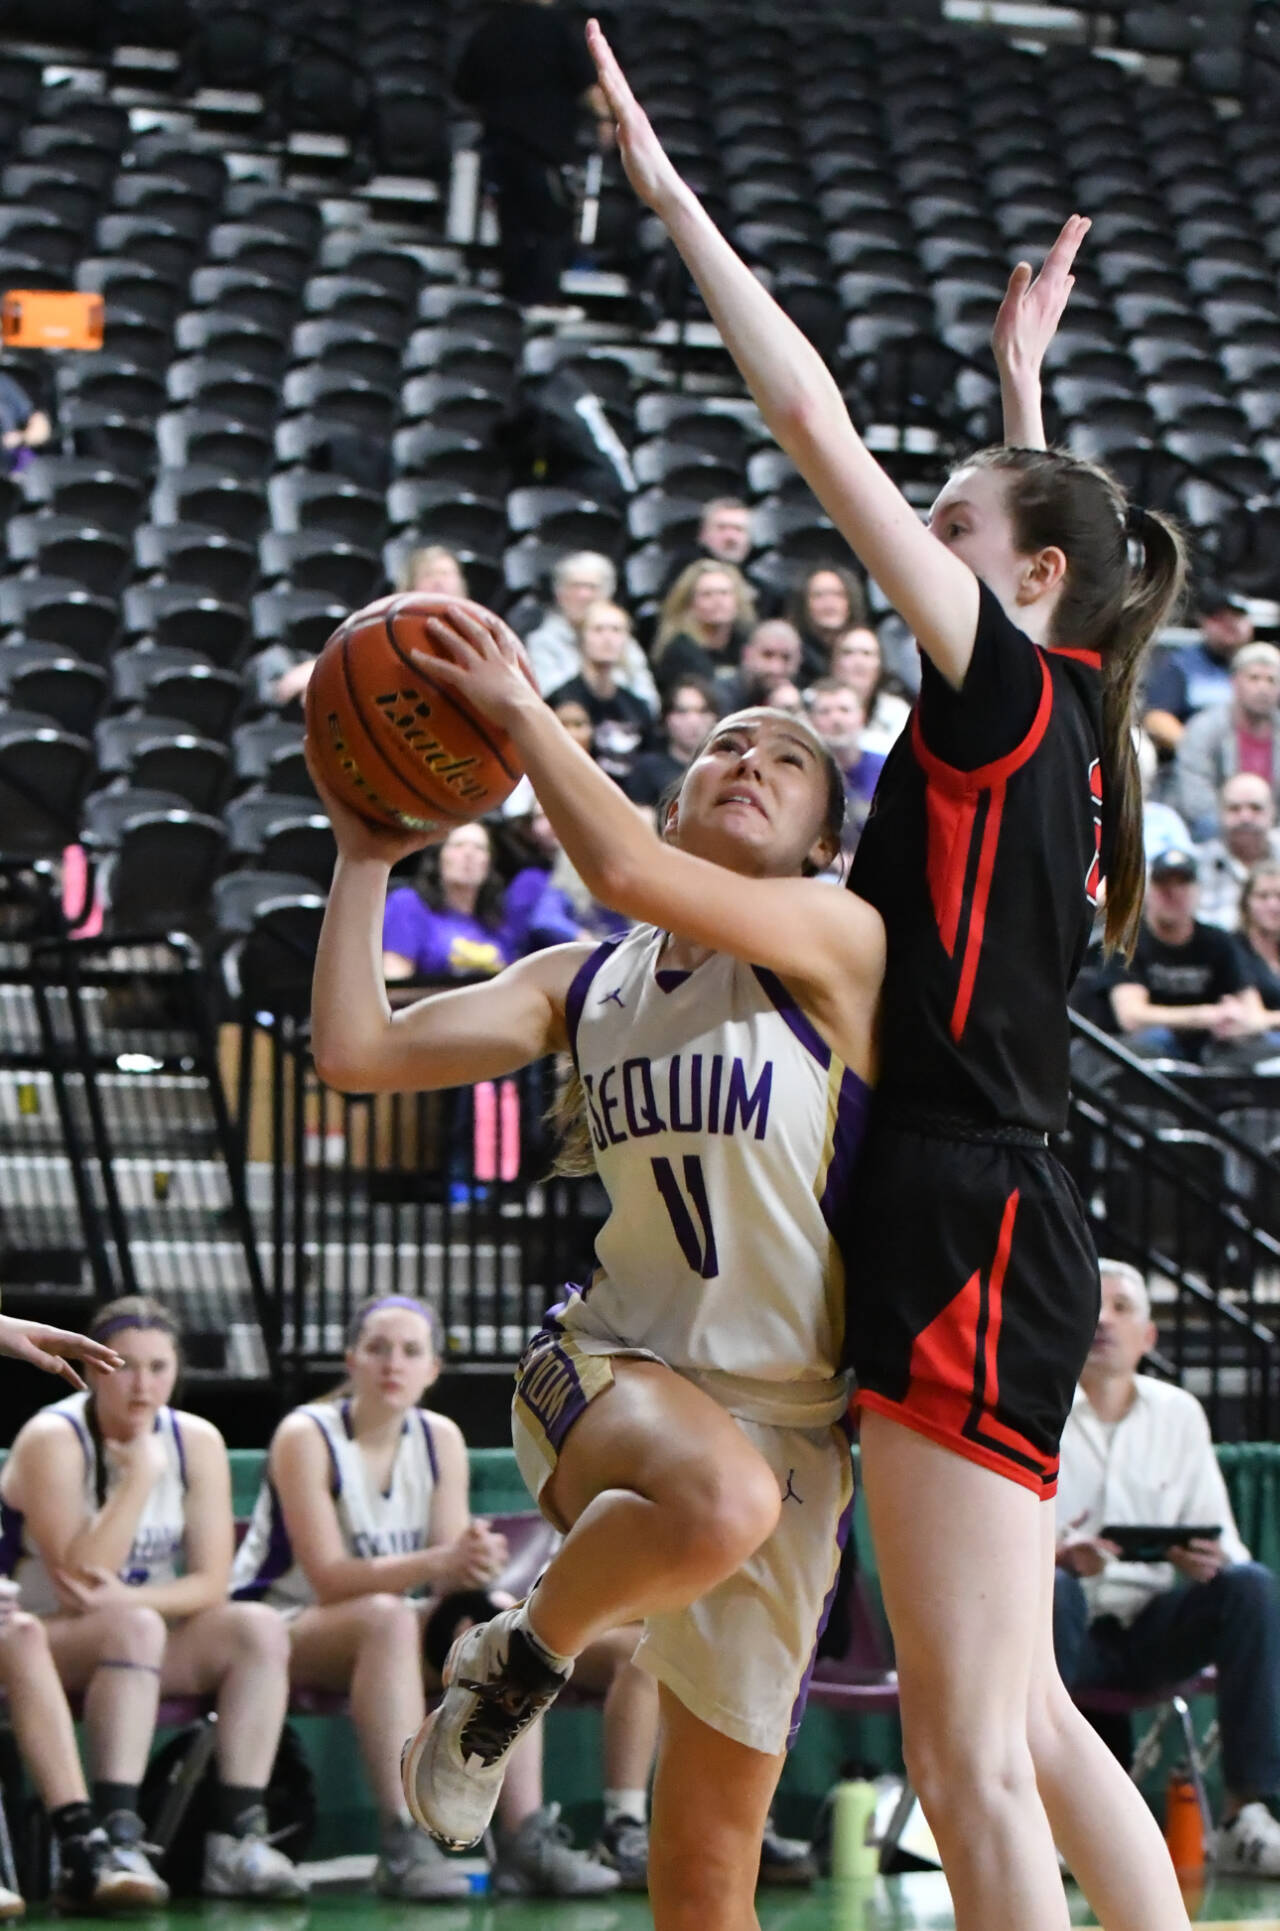 Photo by Jim Heintz / Sequim guard Taryn Johnson, left, drives to the basket in the second half of the Wolves’ 57-37 win over Sammamish in the class 2A state tournament in Yakima on March 1.